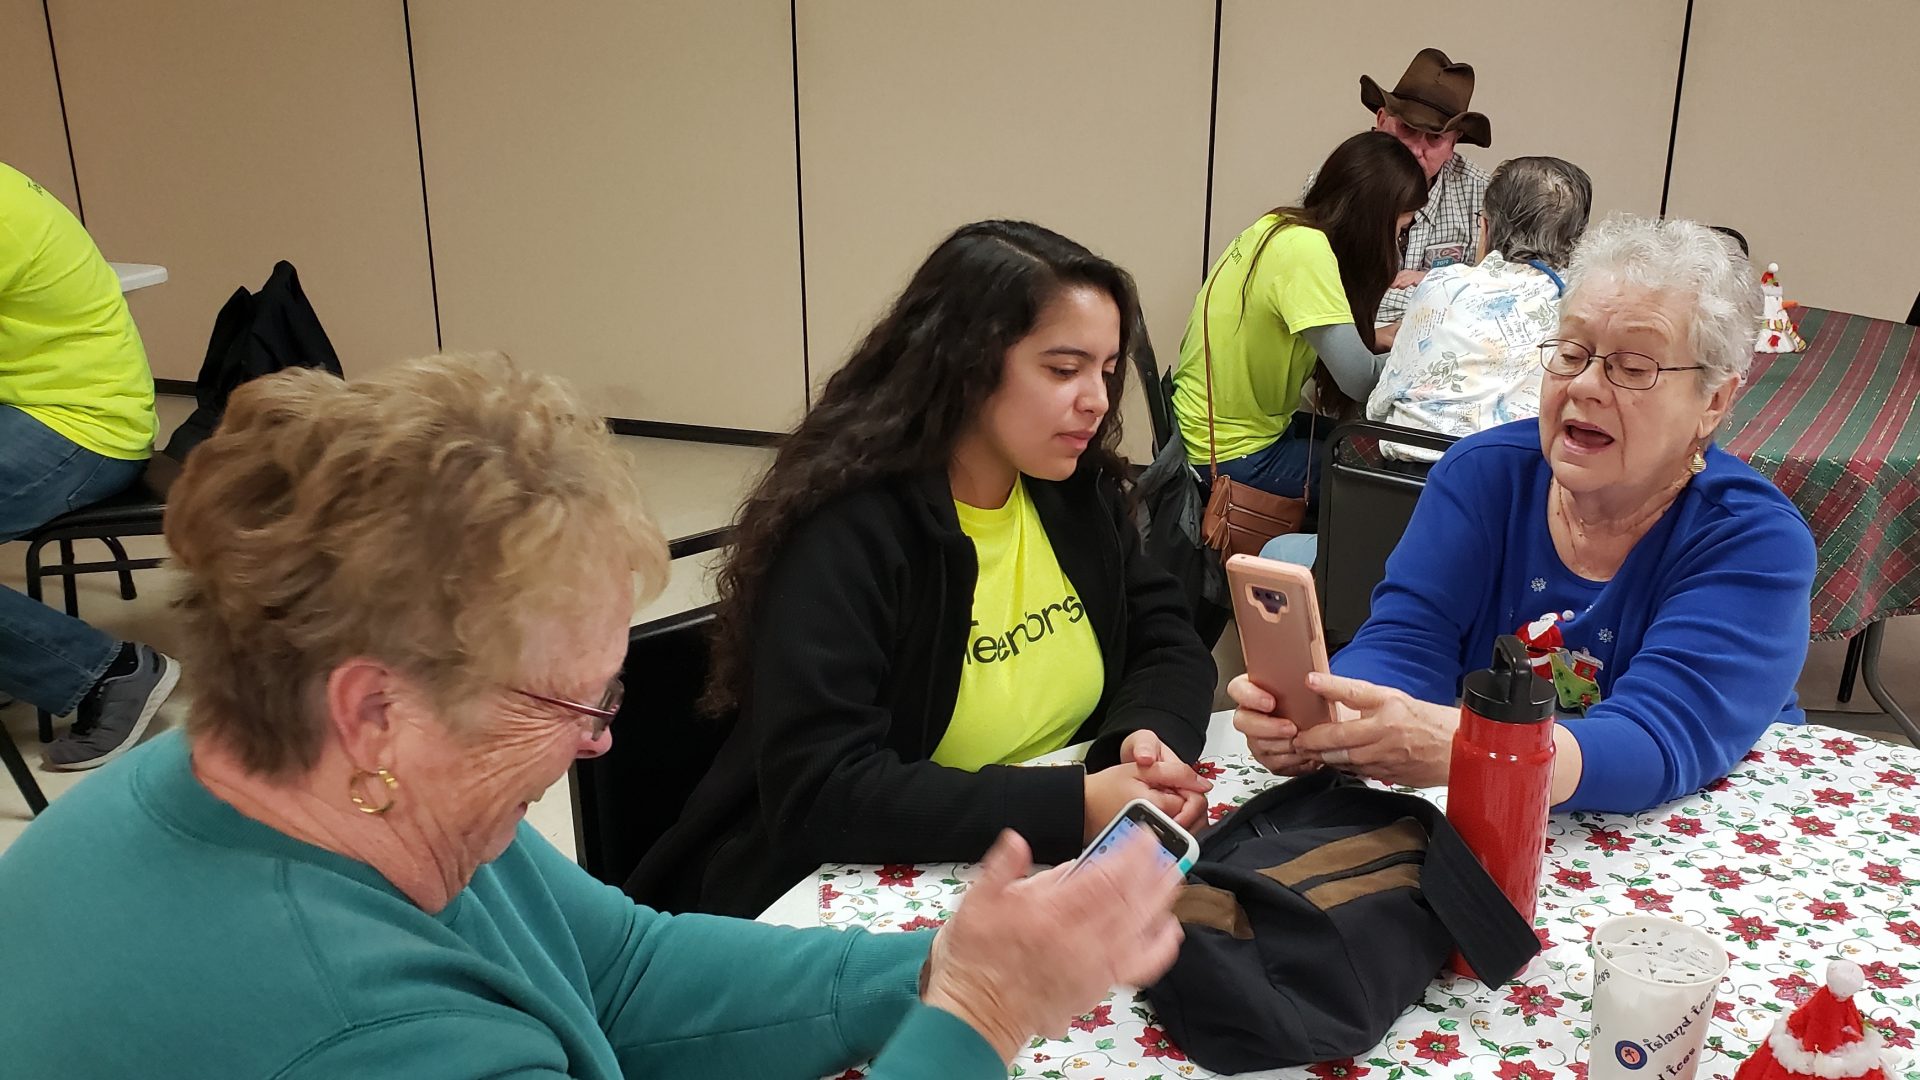 Kendra Gonzales coaches Linda Haverty on how to add a photo of a friend to her contacts list on her phone.